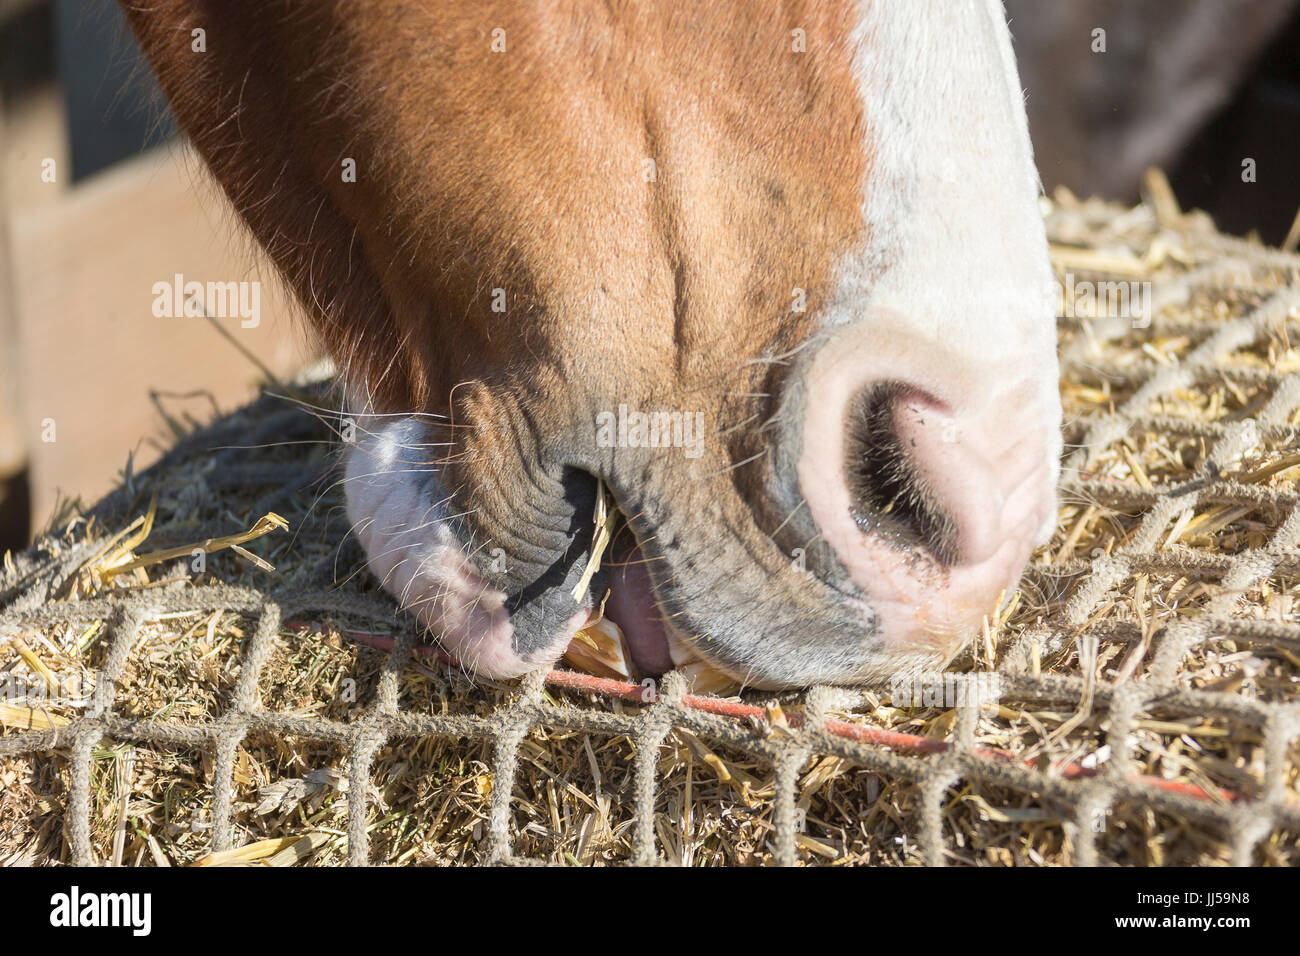 Domestic Horse. Adult eating roughage from a net. Germany Stock Photo